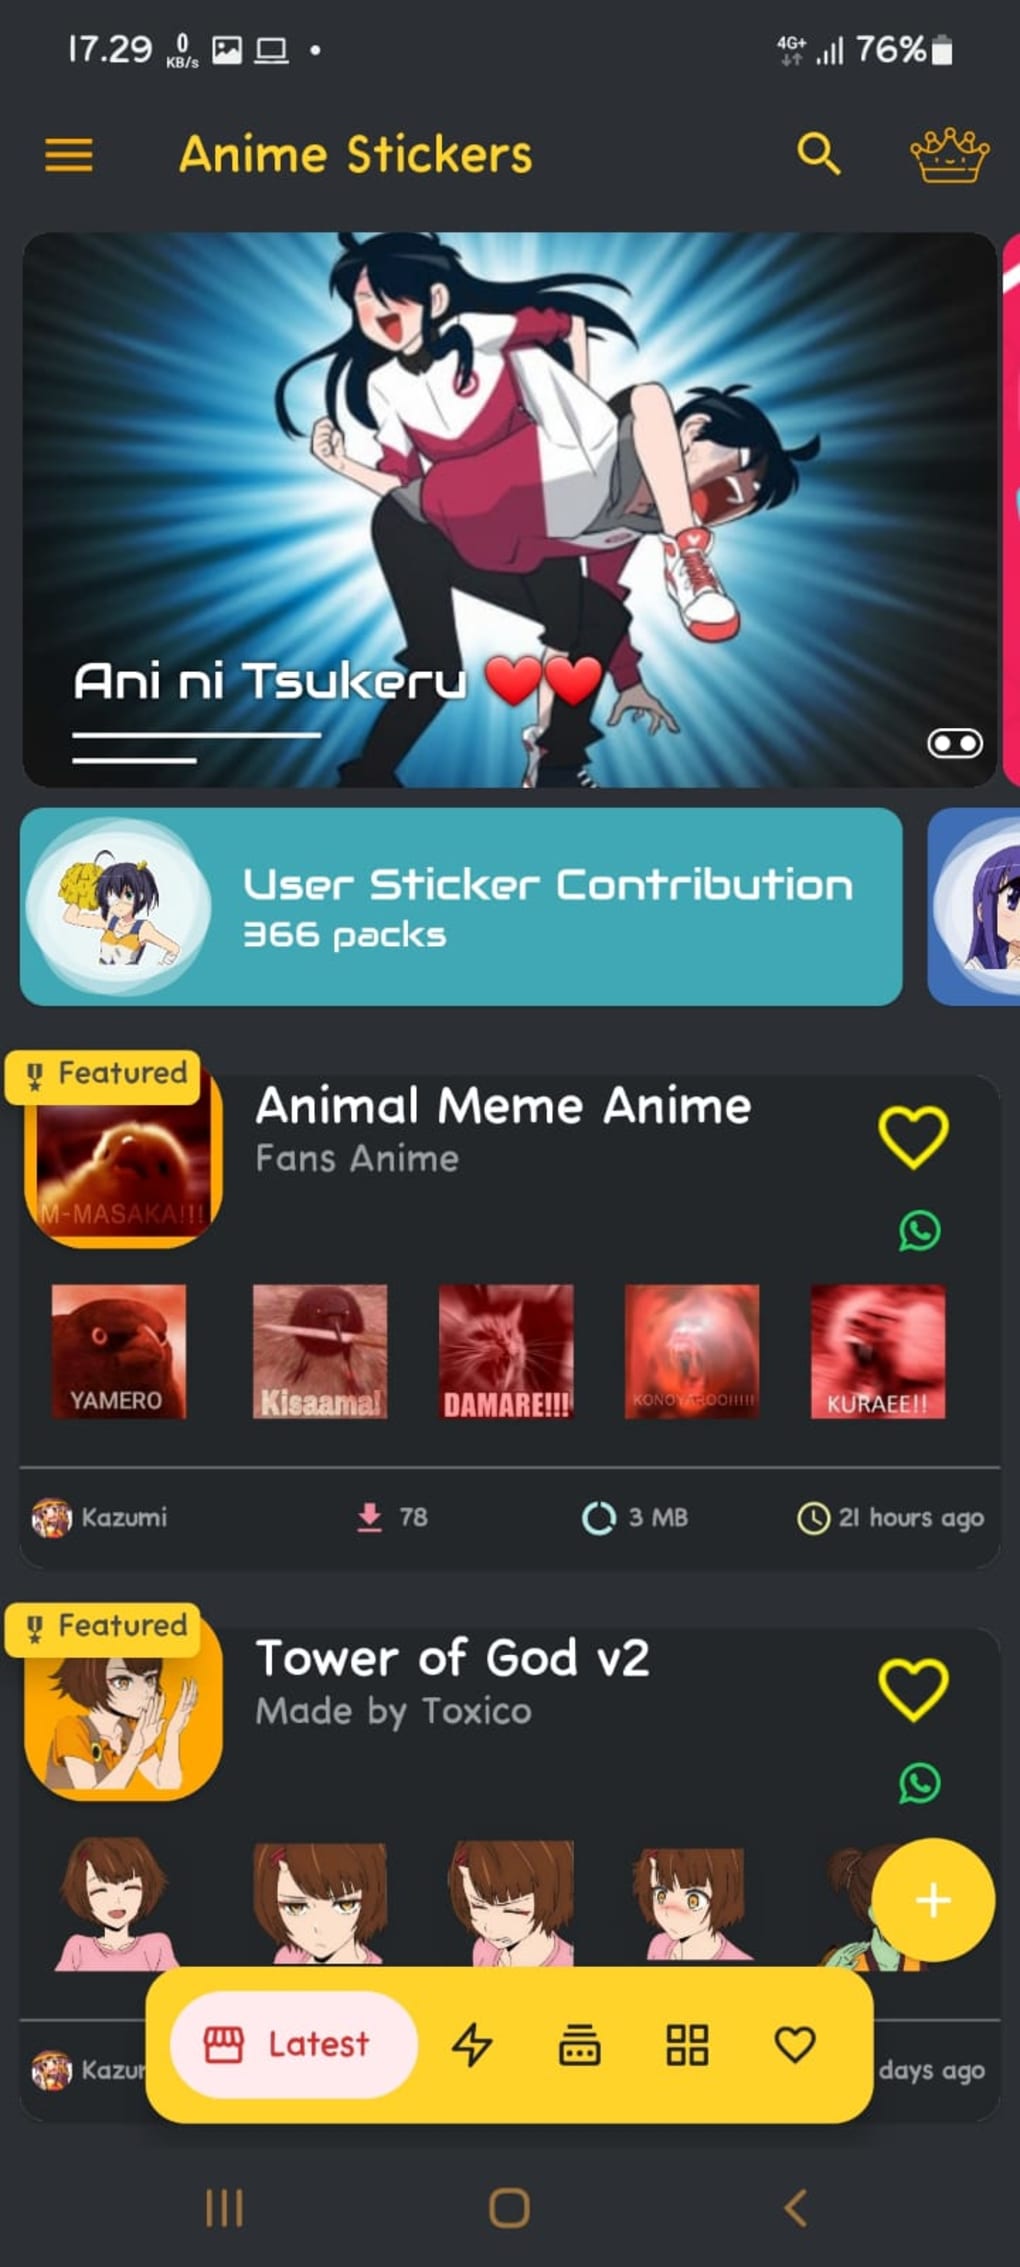 About: Anime Stickers for WhatsApp (Google Play version)